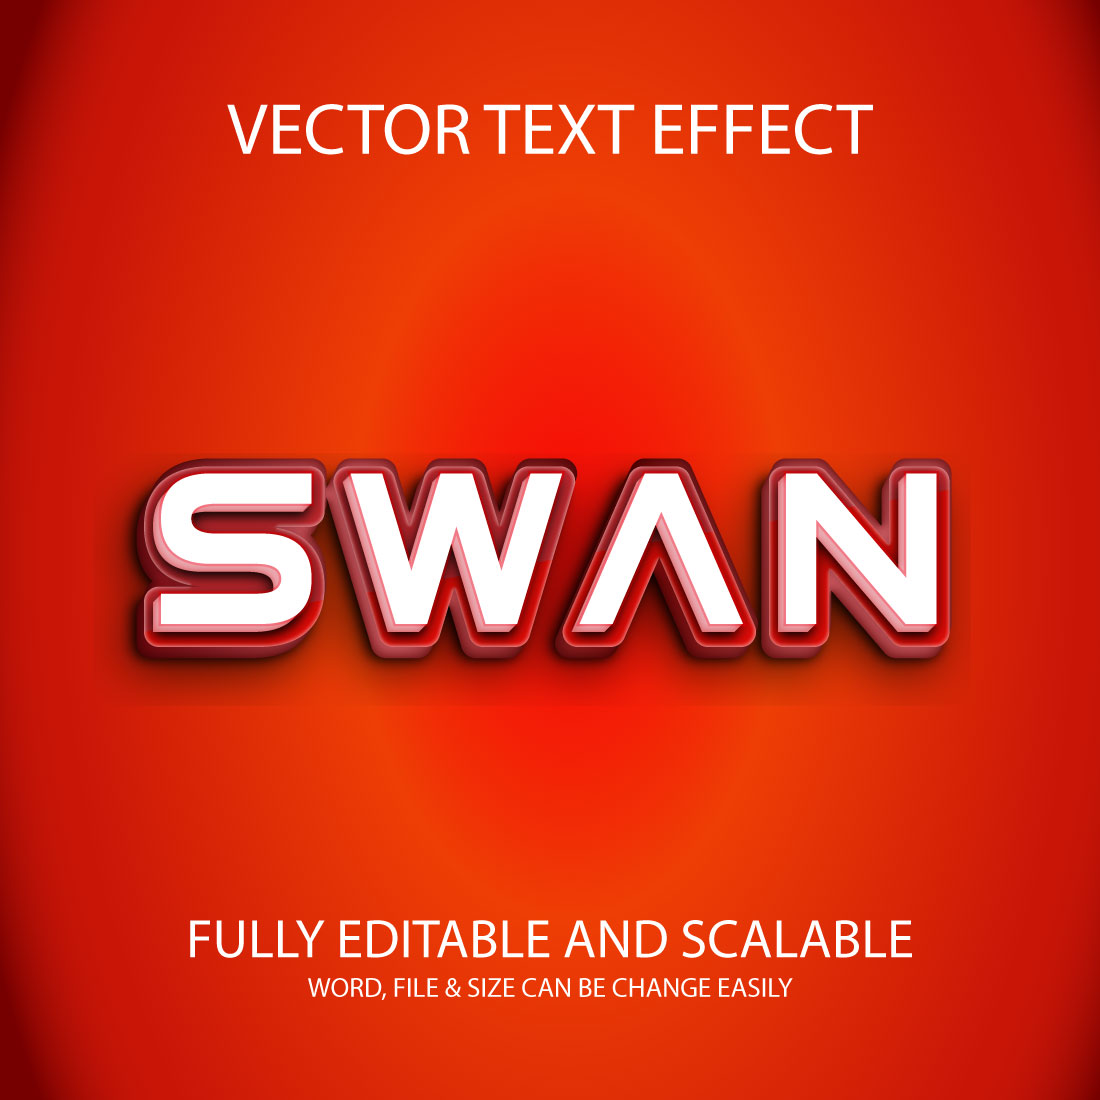 Swan Text Effect Design cover image.